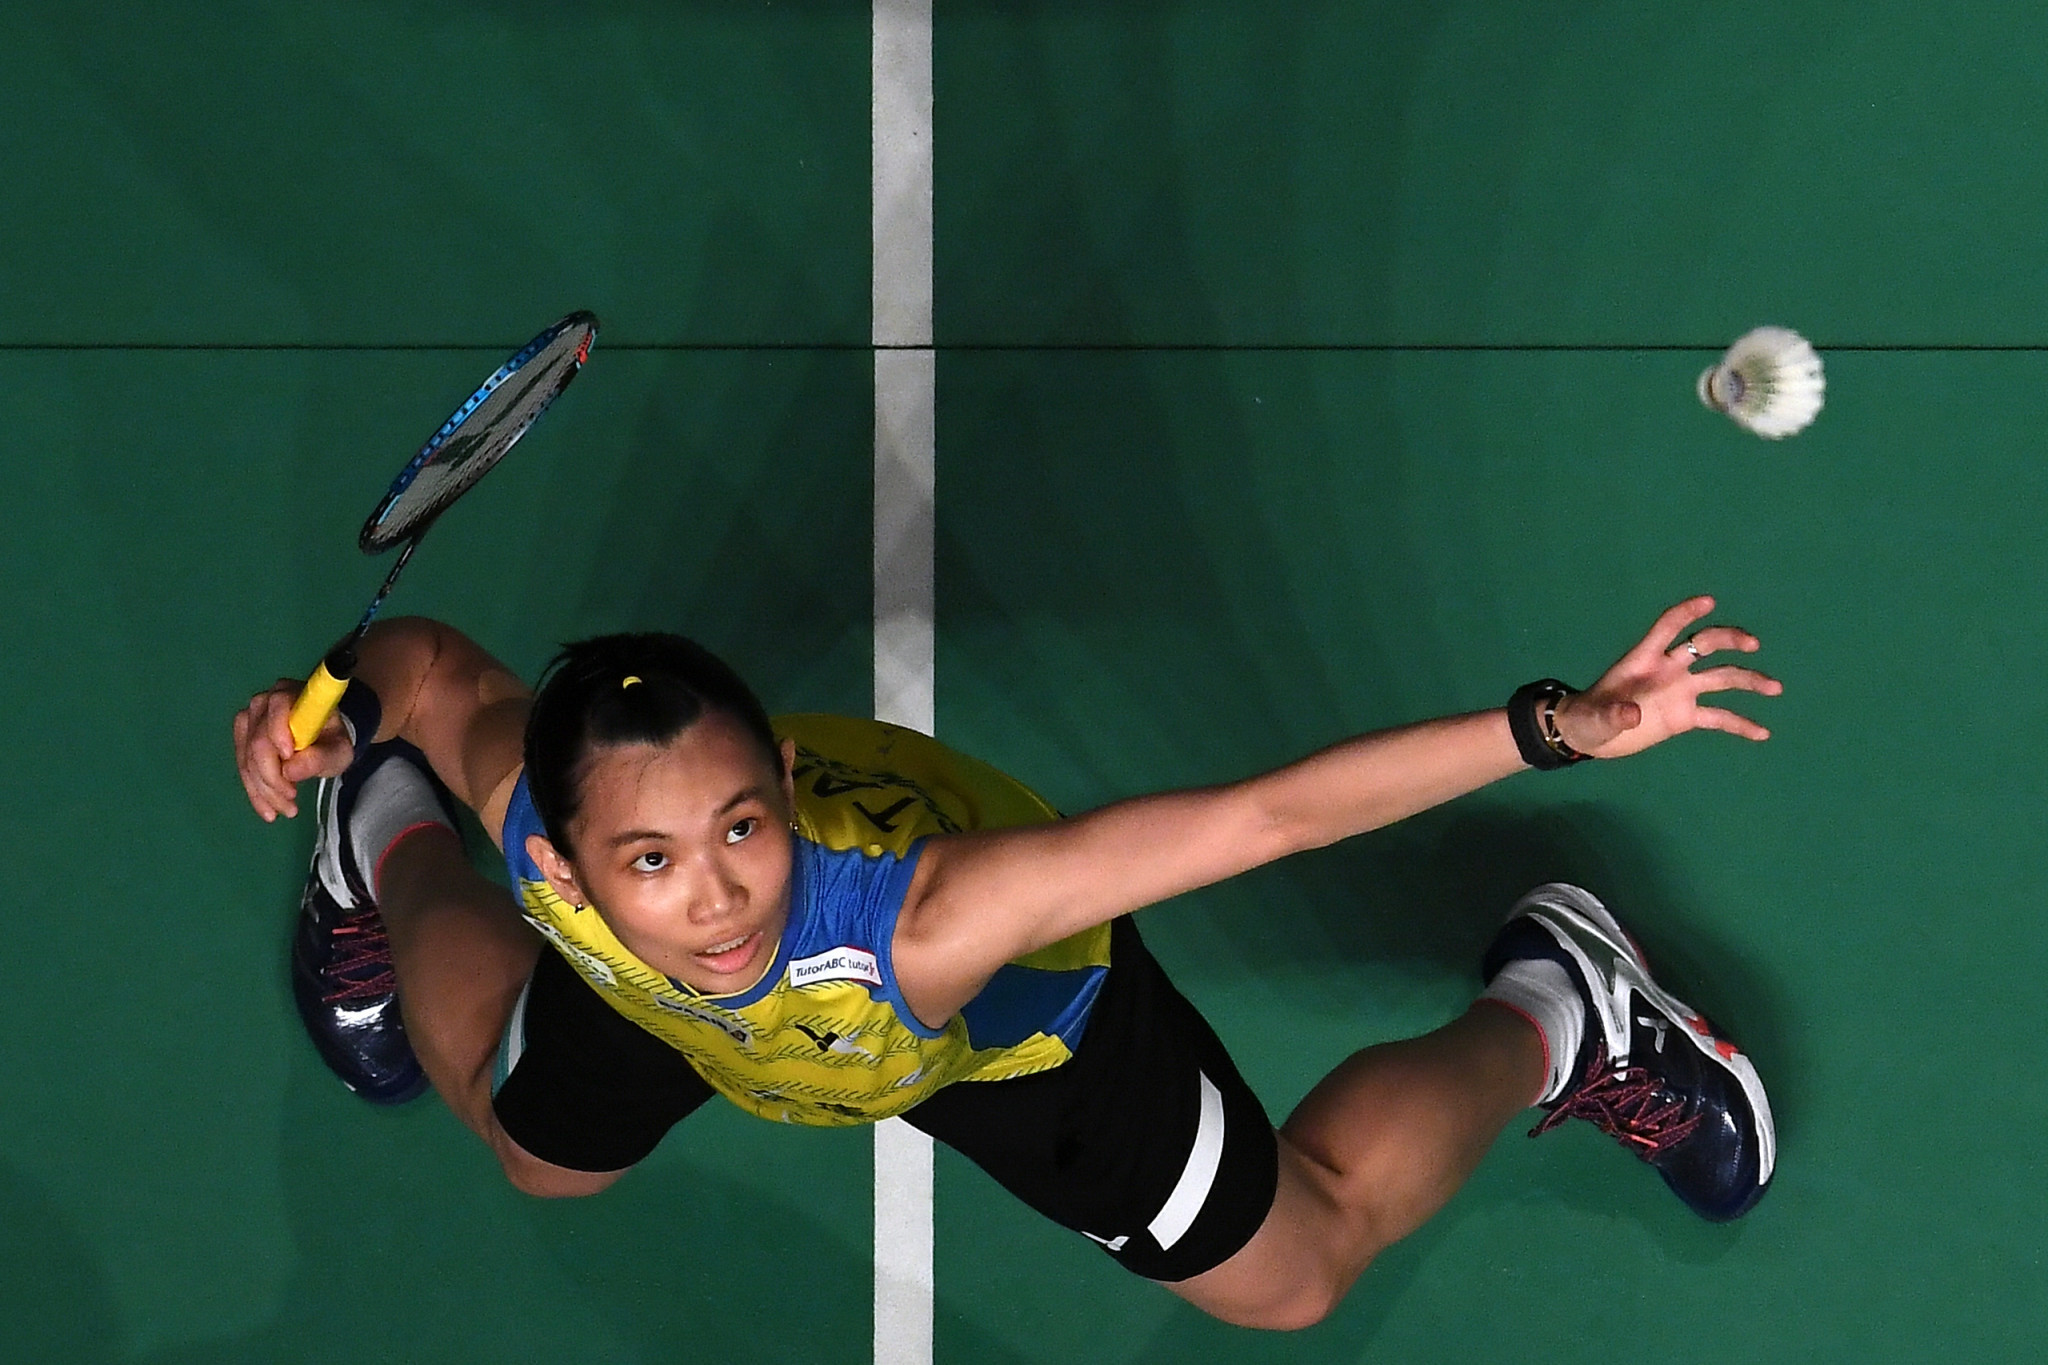 Top seed Tai Tzu-ying is through to the women's singles quarter-finals ©Getty Images